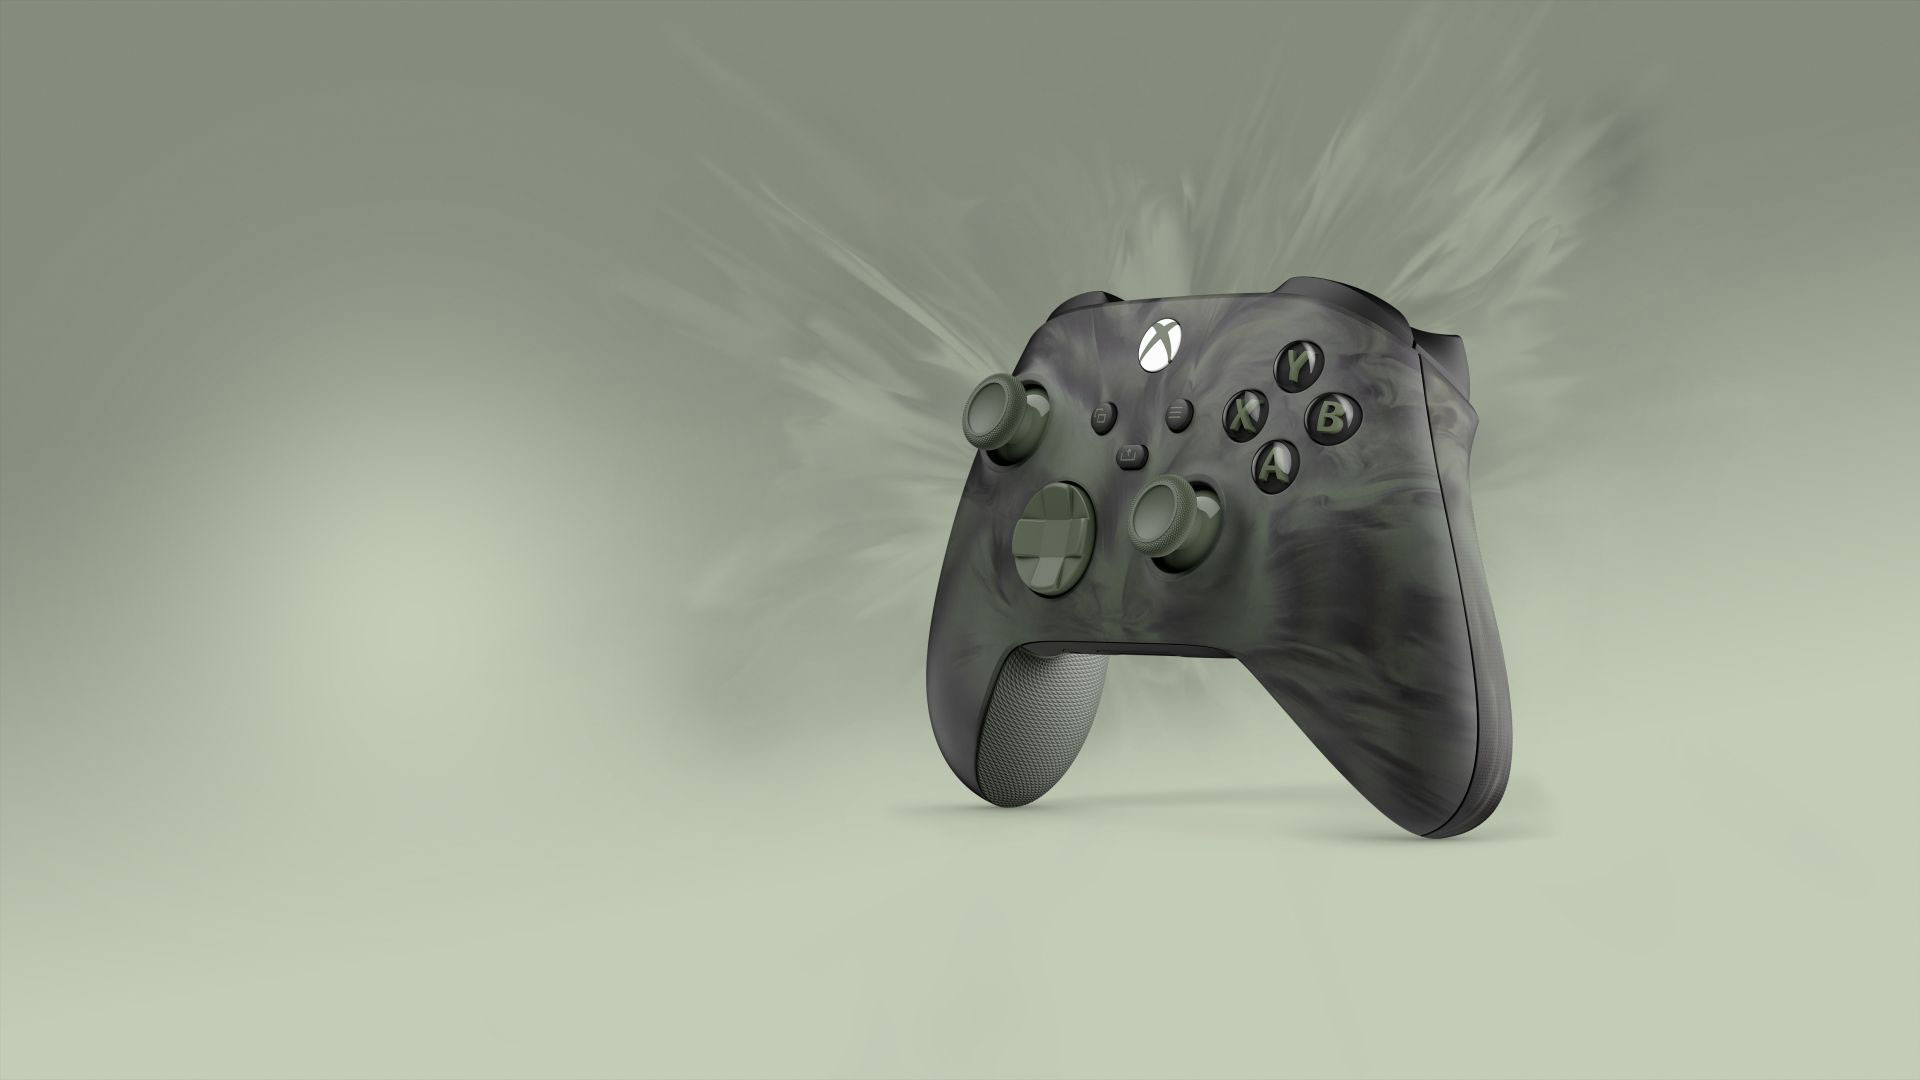 The Nocturnal Vapor Special Edition Xbox Wireless Controller is available to preorder today